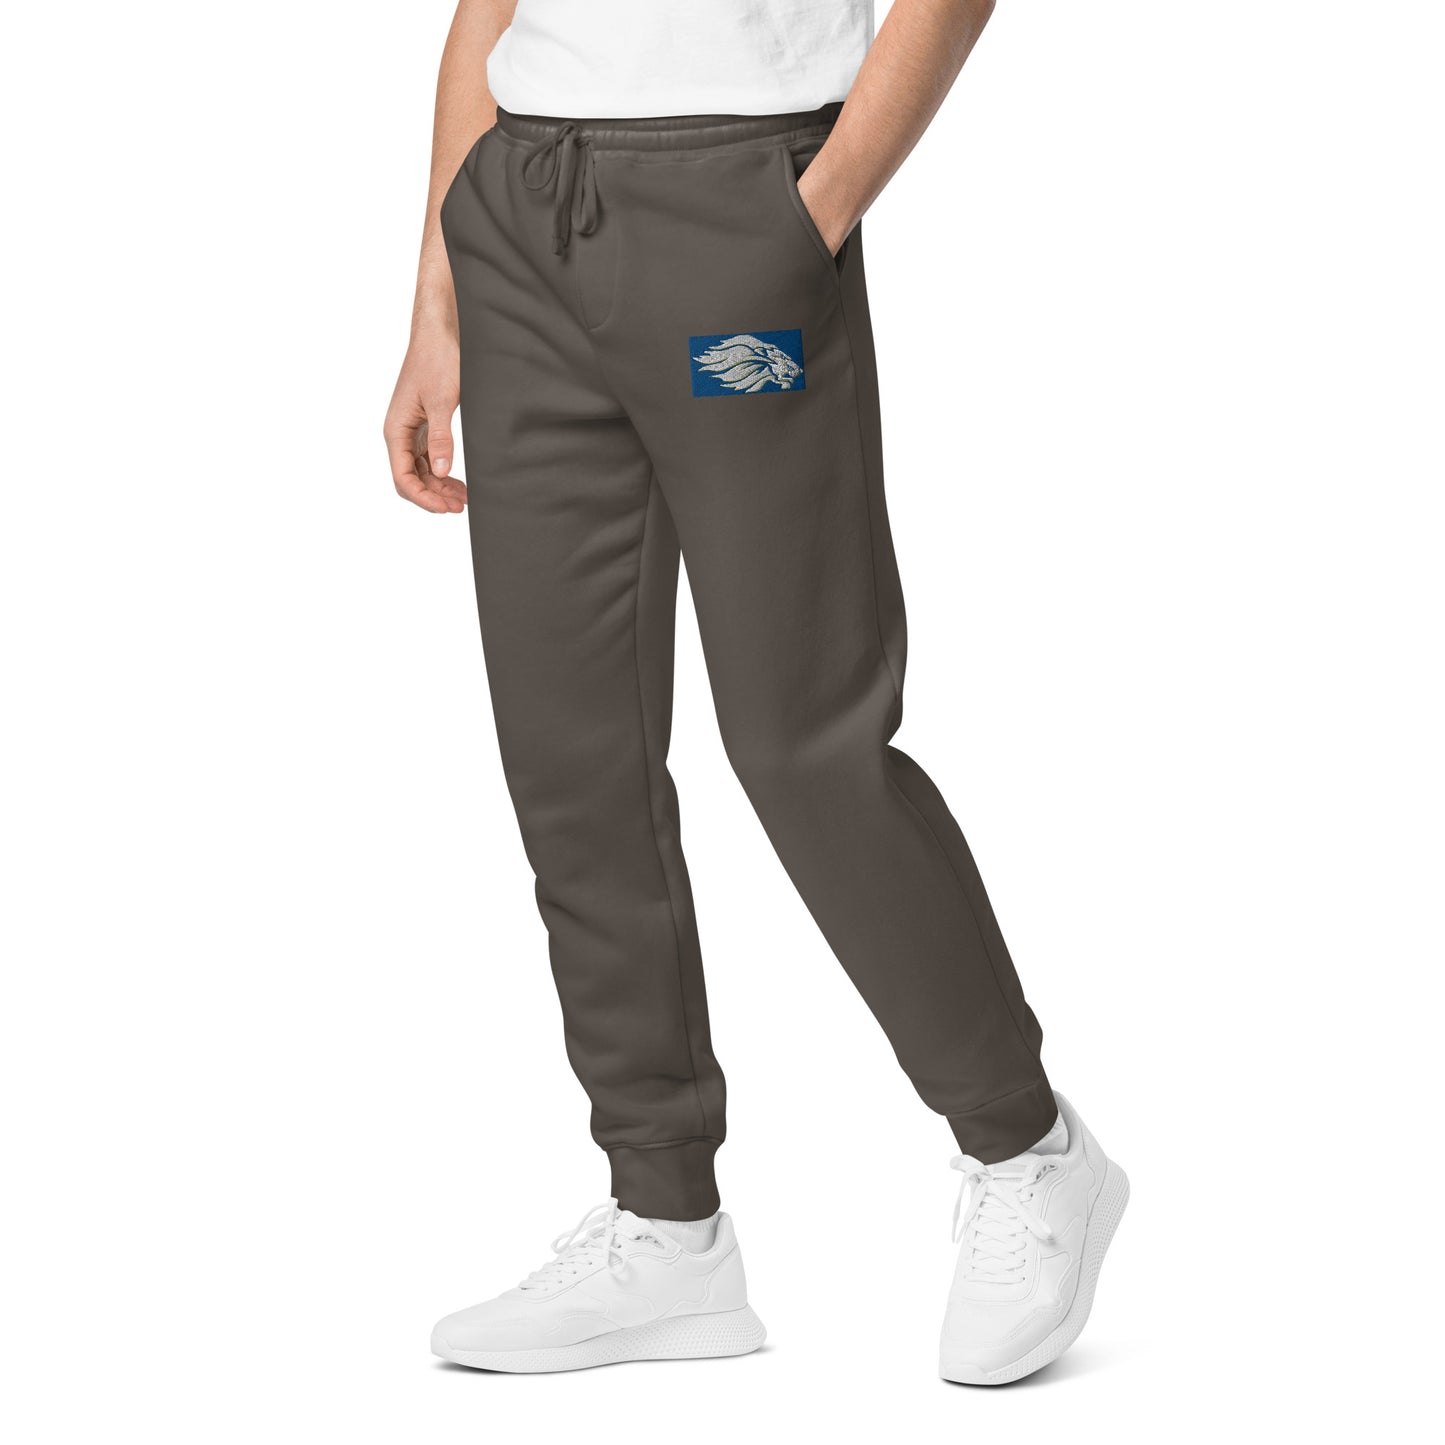 Lions Logo- Unisex pigment-dyed sweatpants with Embroidery